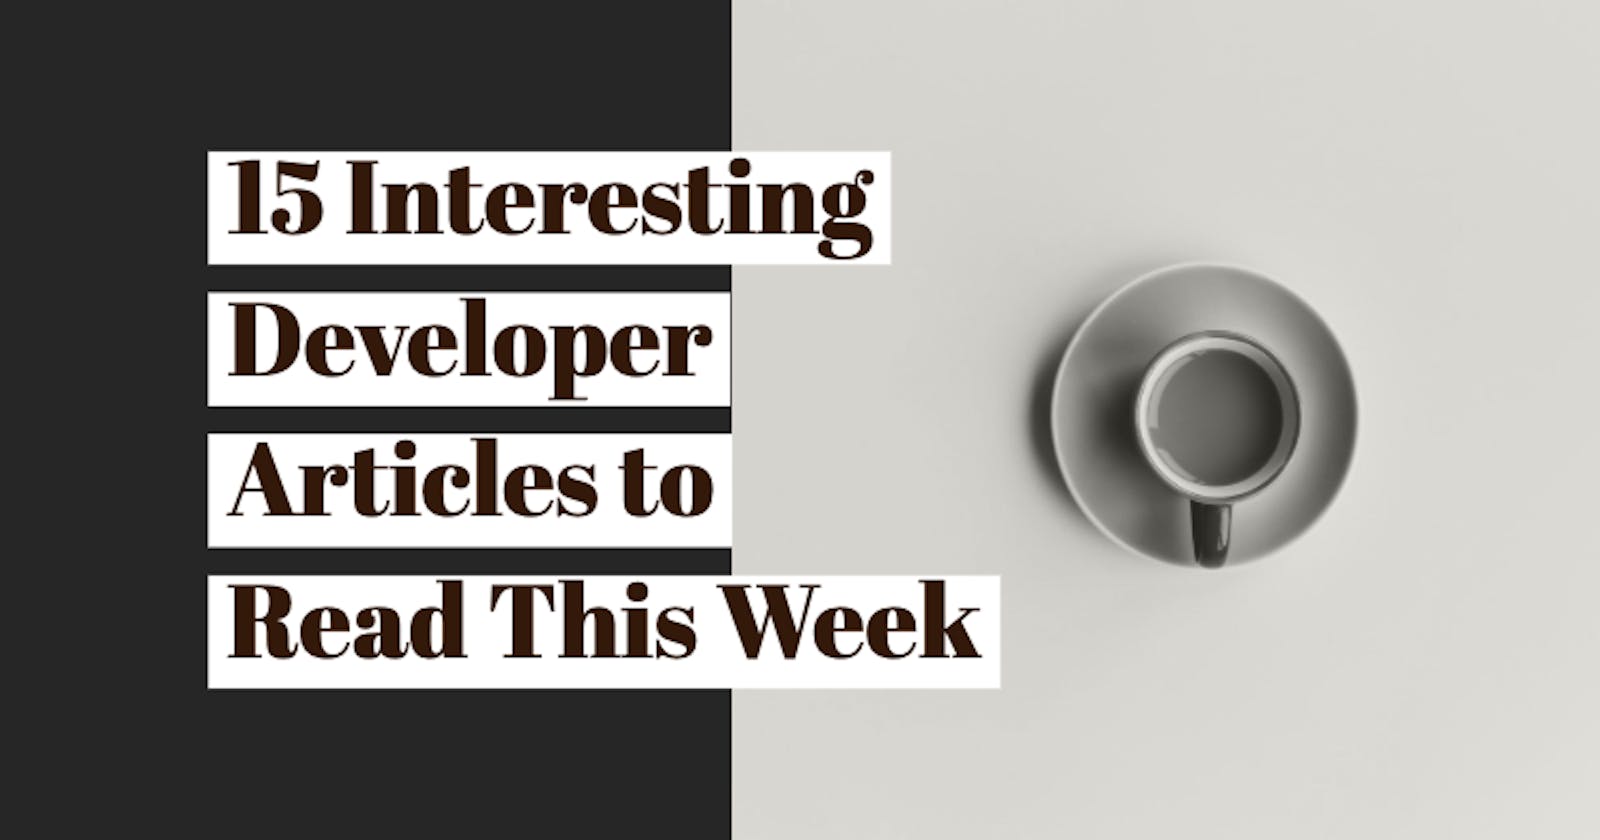 15 Interesting Developer Articles to Read This Week